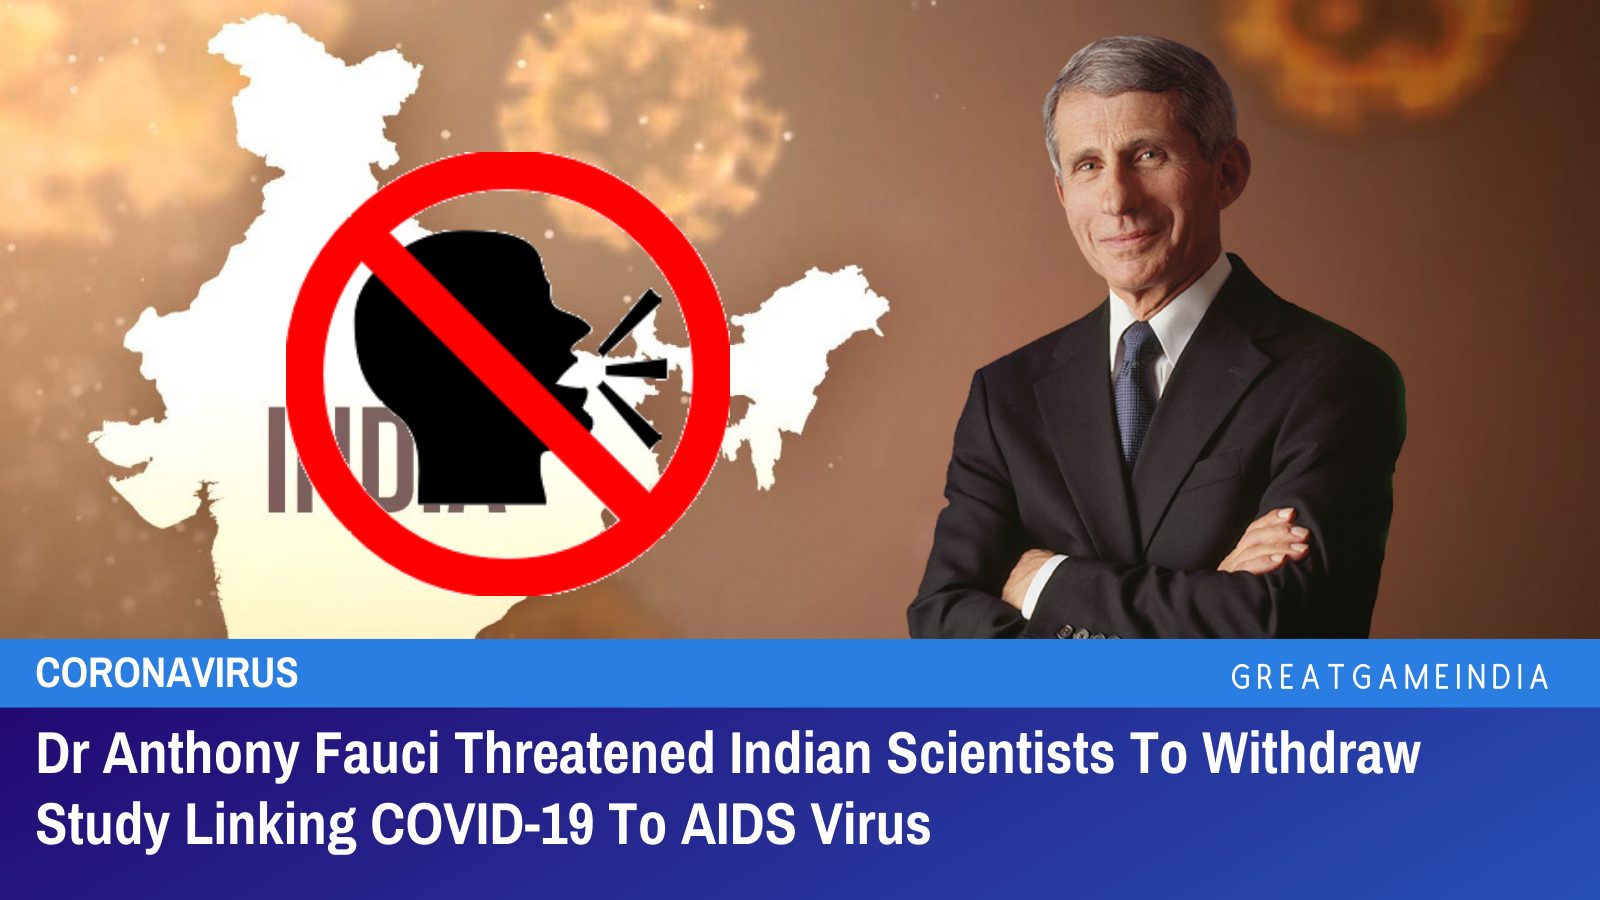 Dr Anthony Fauci Threatened Indian Scientists To Withdraw Study Linking COVID-19 To AIDS Virus